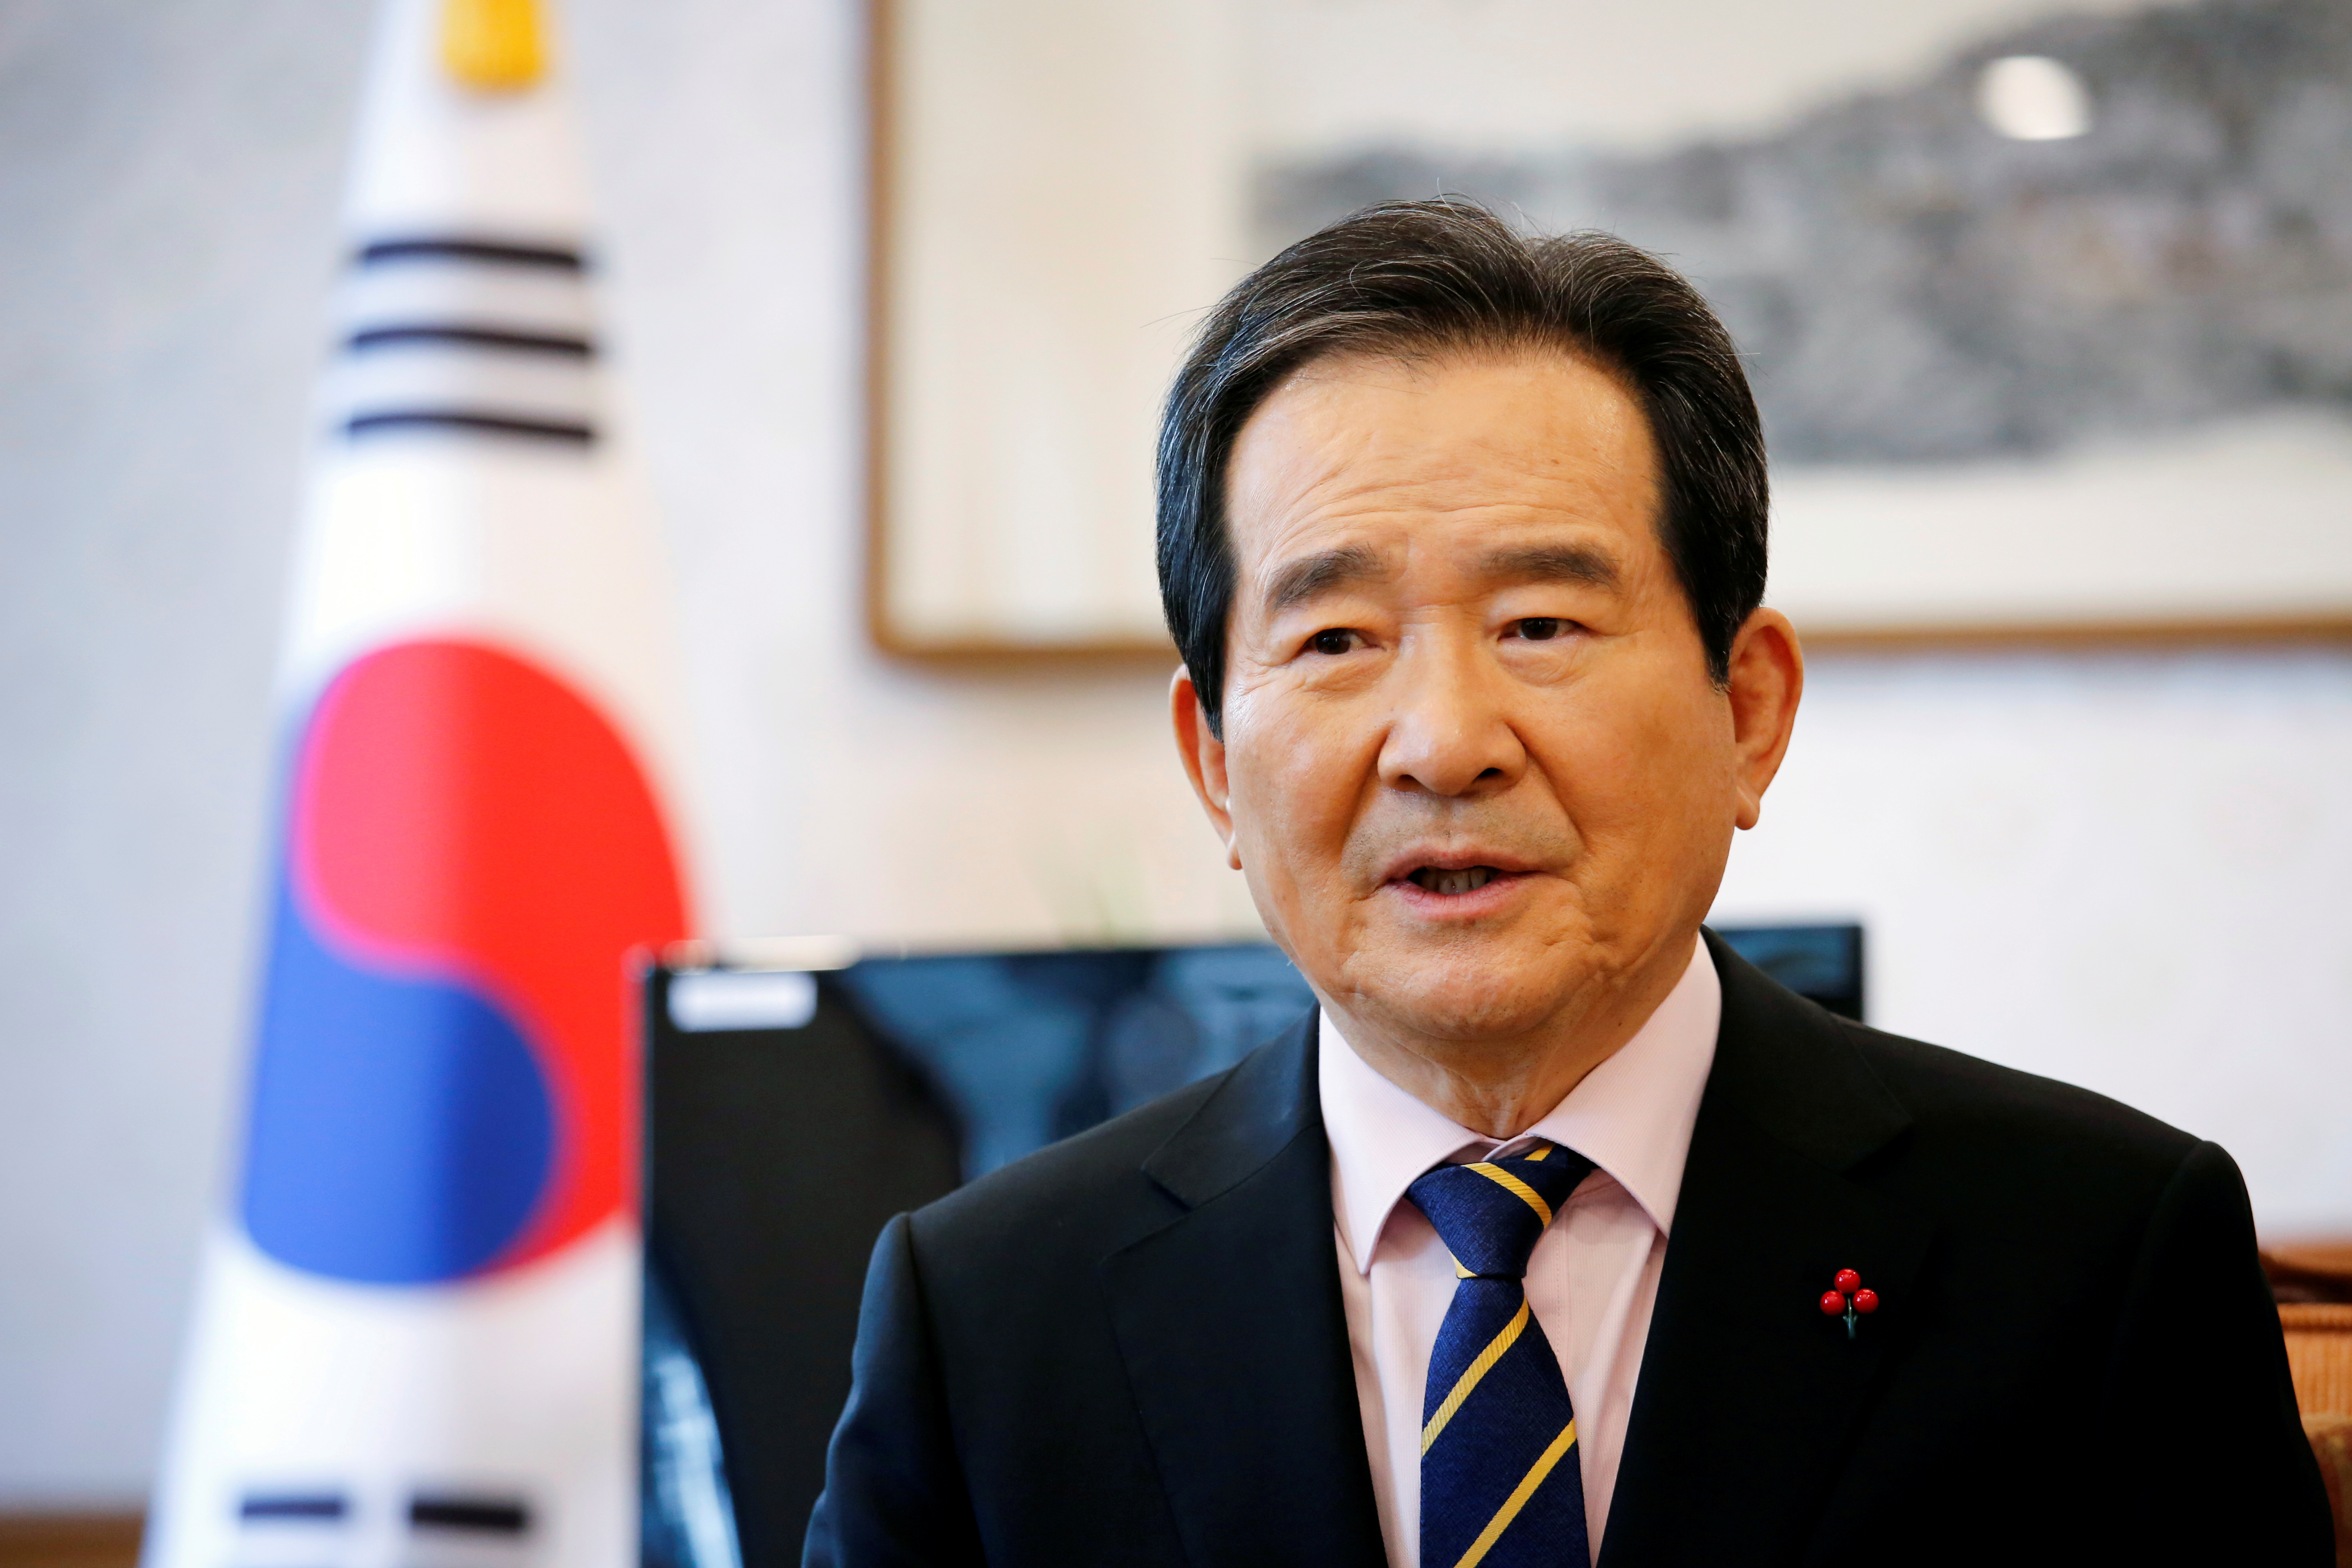 South Korea's Prime Minister Chung Sye-kyun speaks during an interview with Reuters in Seoul